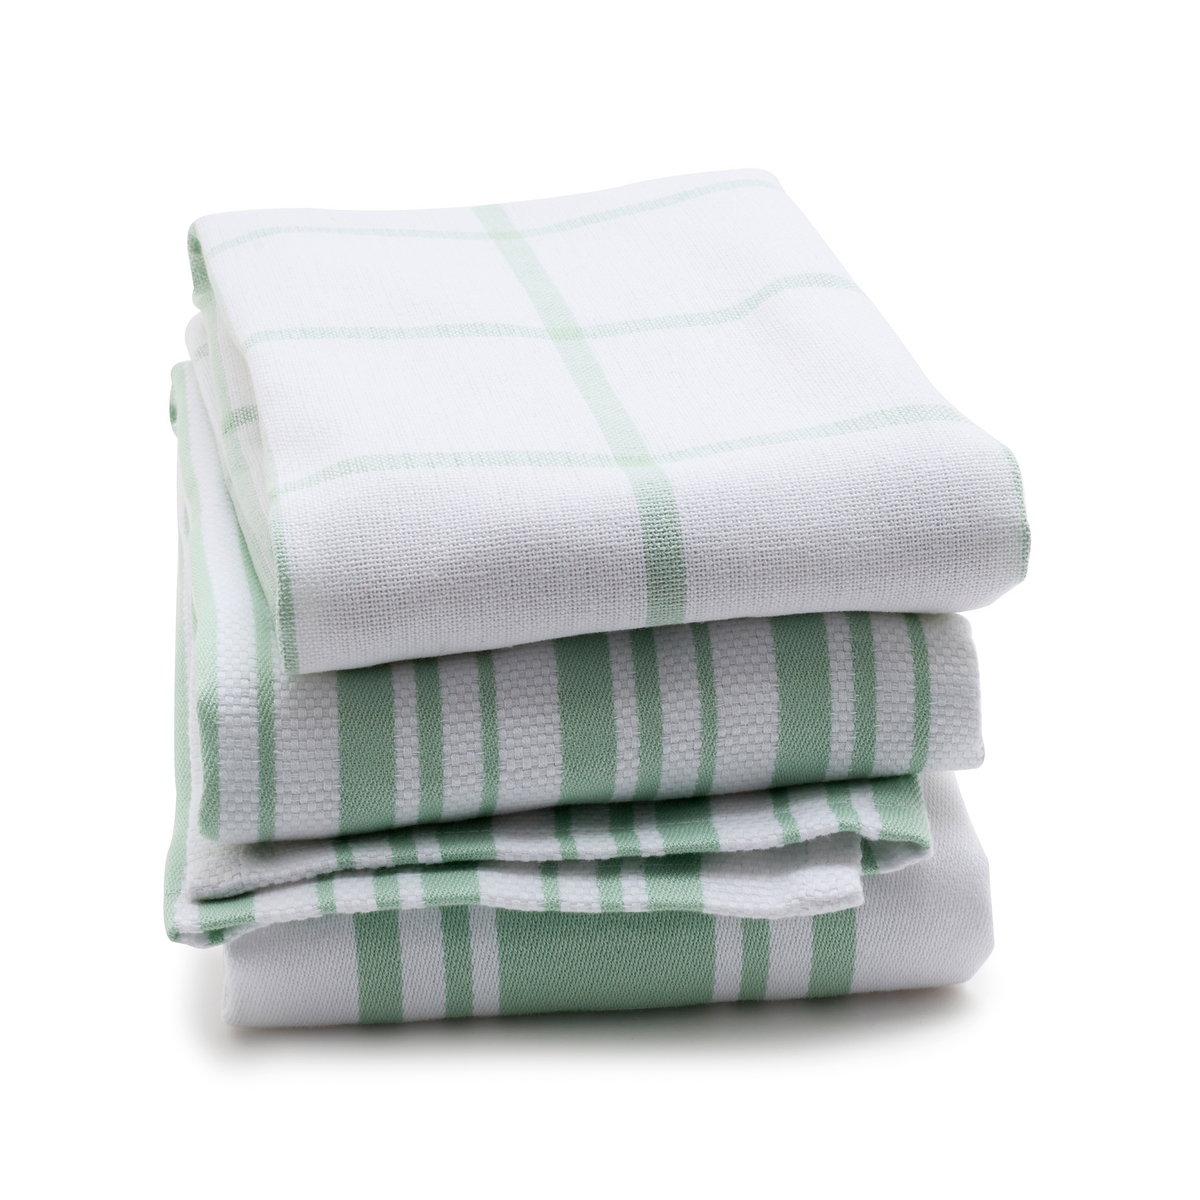 Tips for Keeping Cotton Towels From Losing Their Color